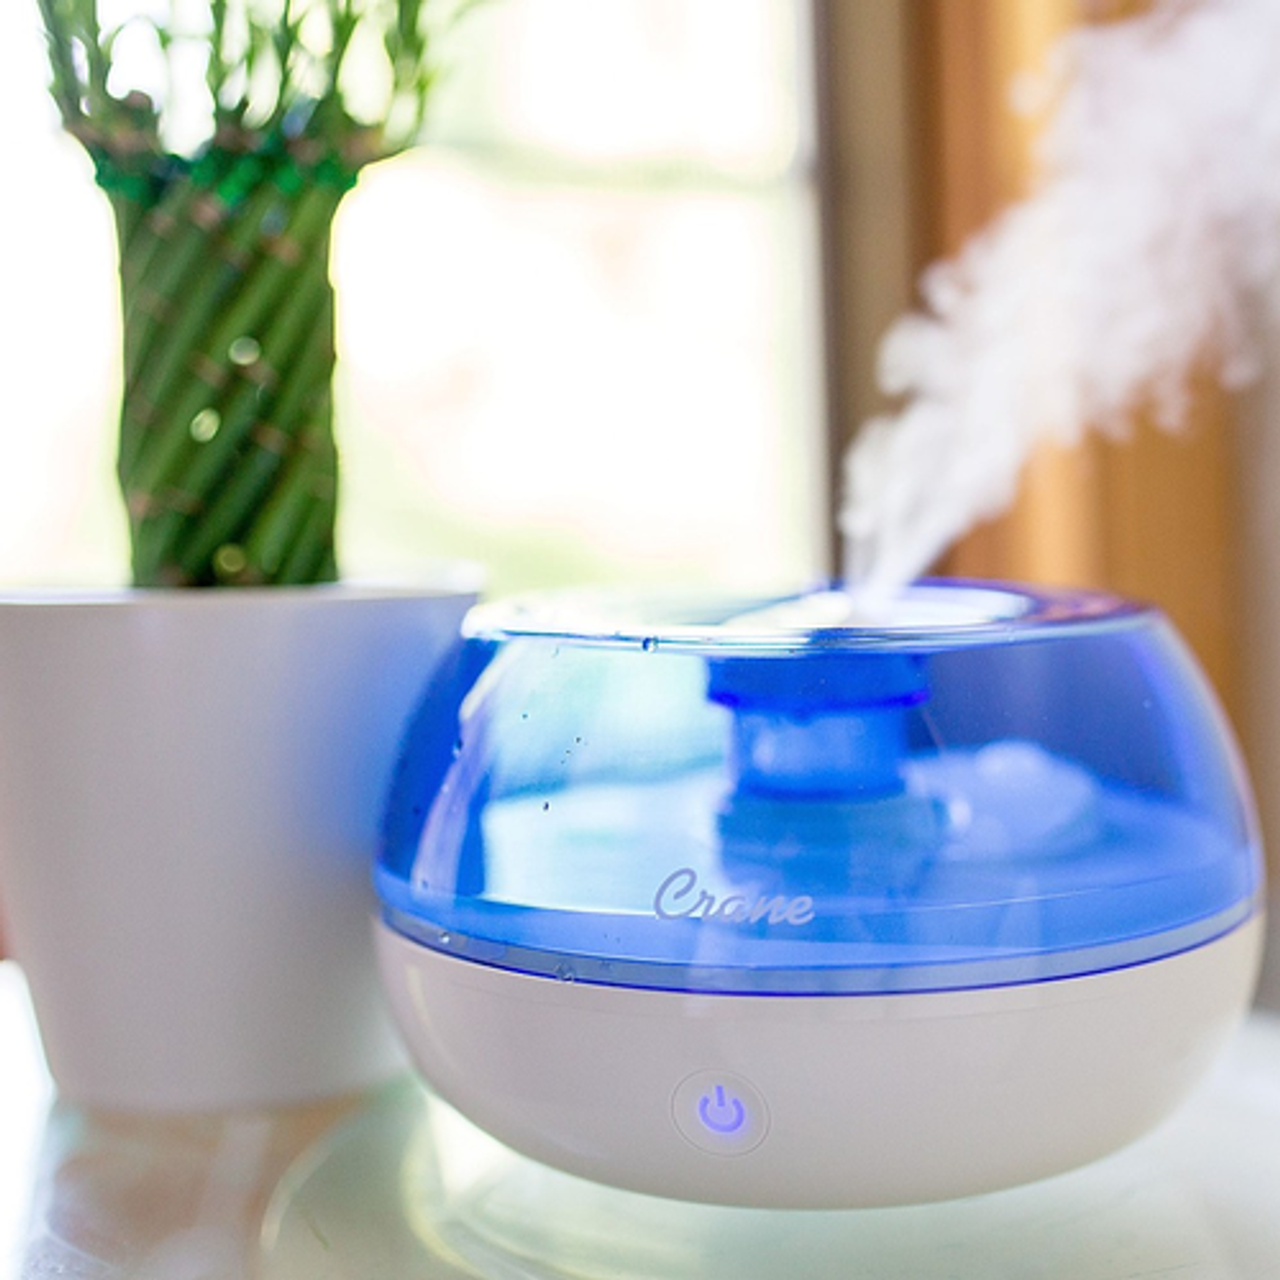 CRANE - 0.2 Gal. Personal Ultrasonic Cool Mist Humidifier for Small Rooms up to 160 sq. ft. - Blue/White